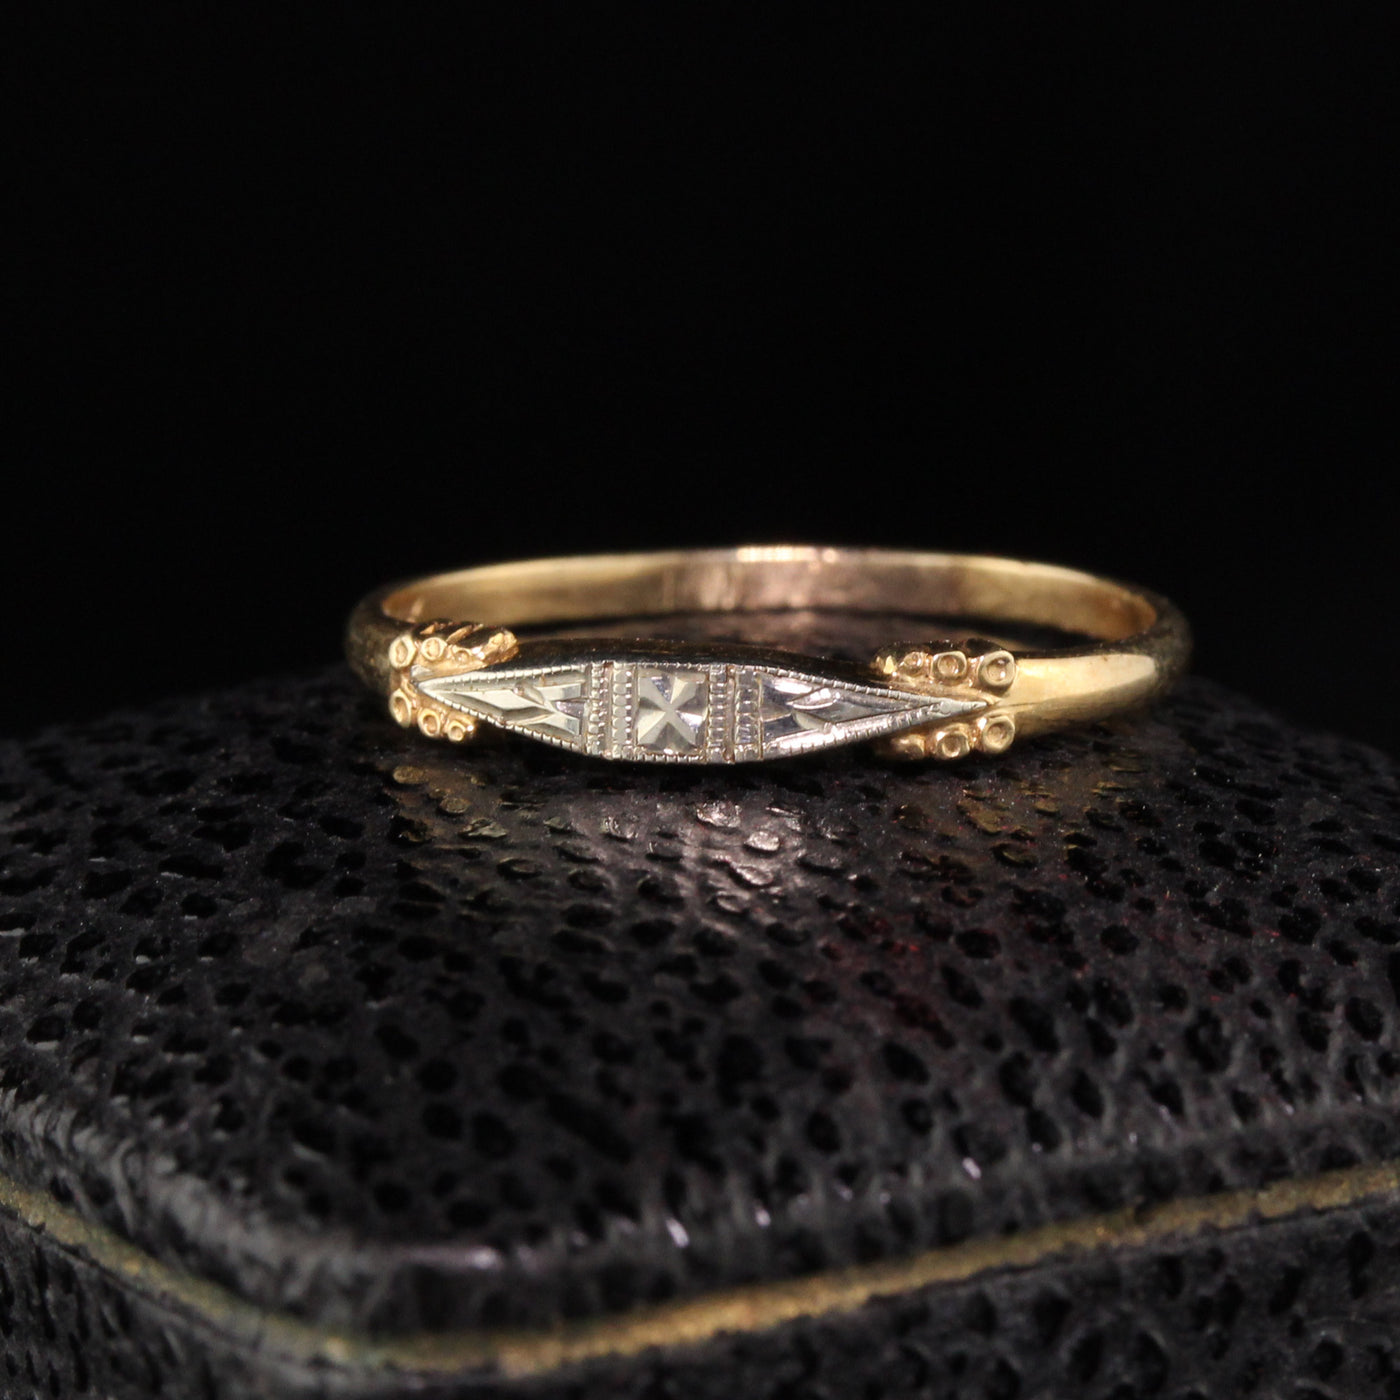 Antique Art Deco 14K Yellow Gold Engraved Wedding Band - Size 6 1/4